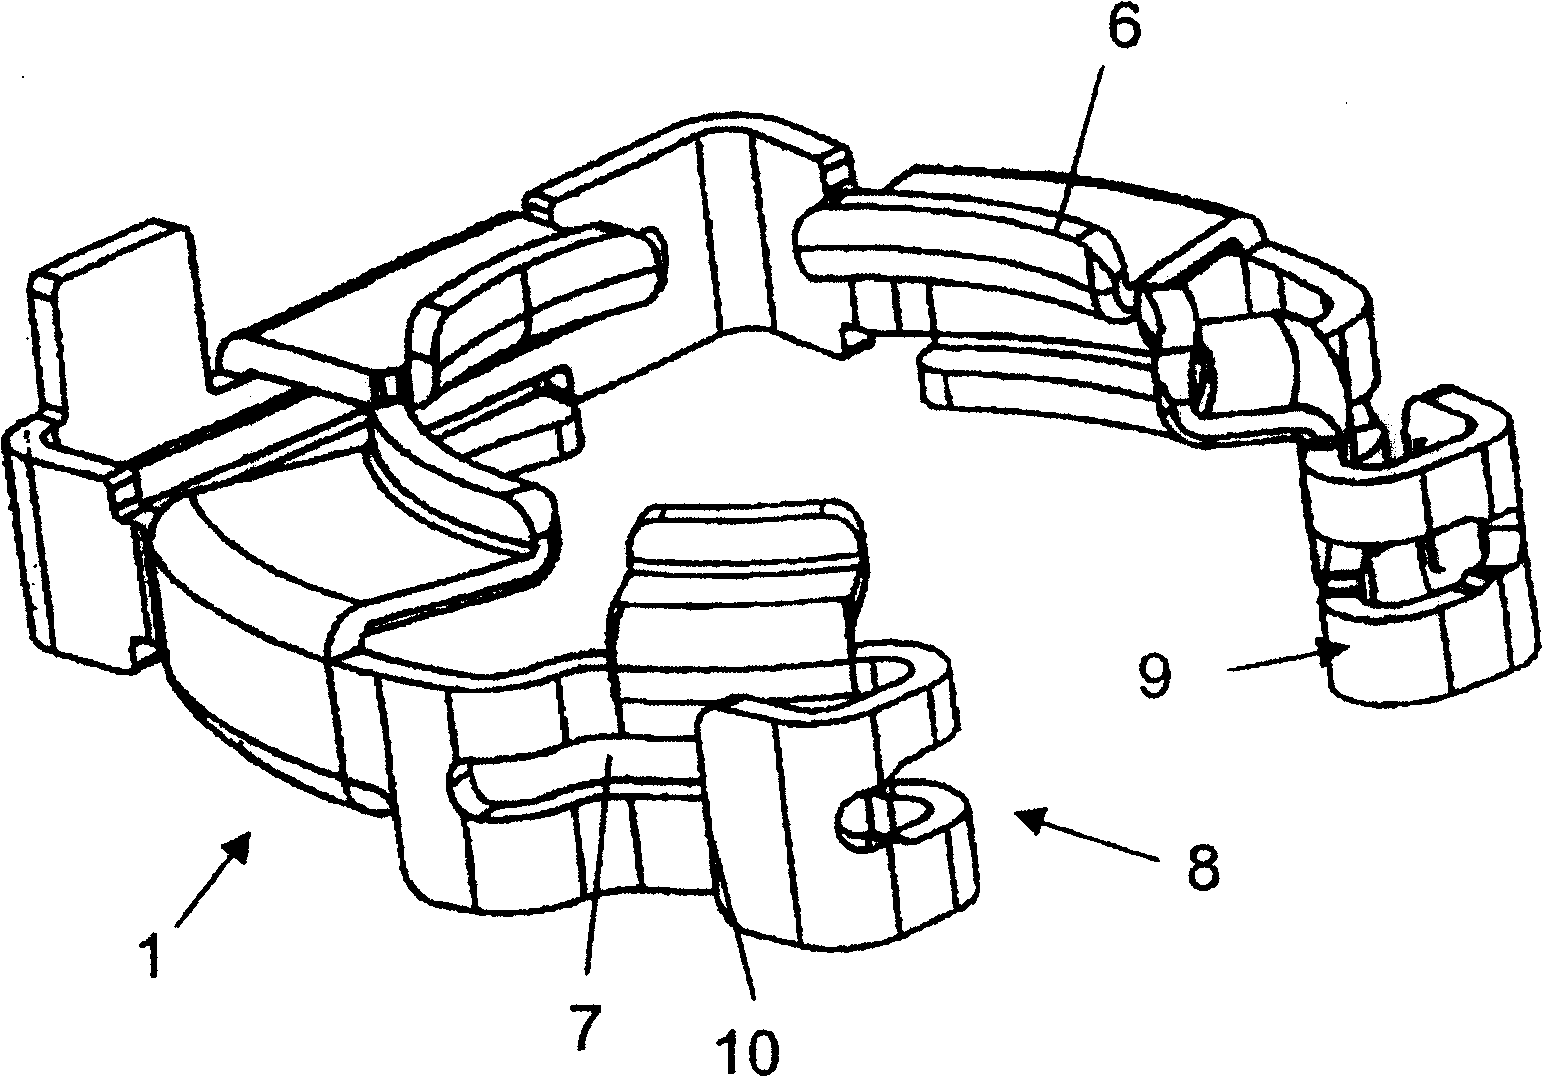 Clamp for fixing and connecting pipes